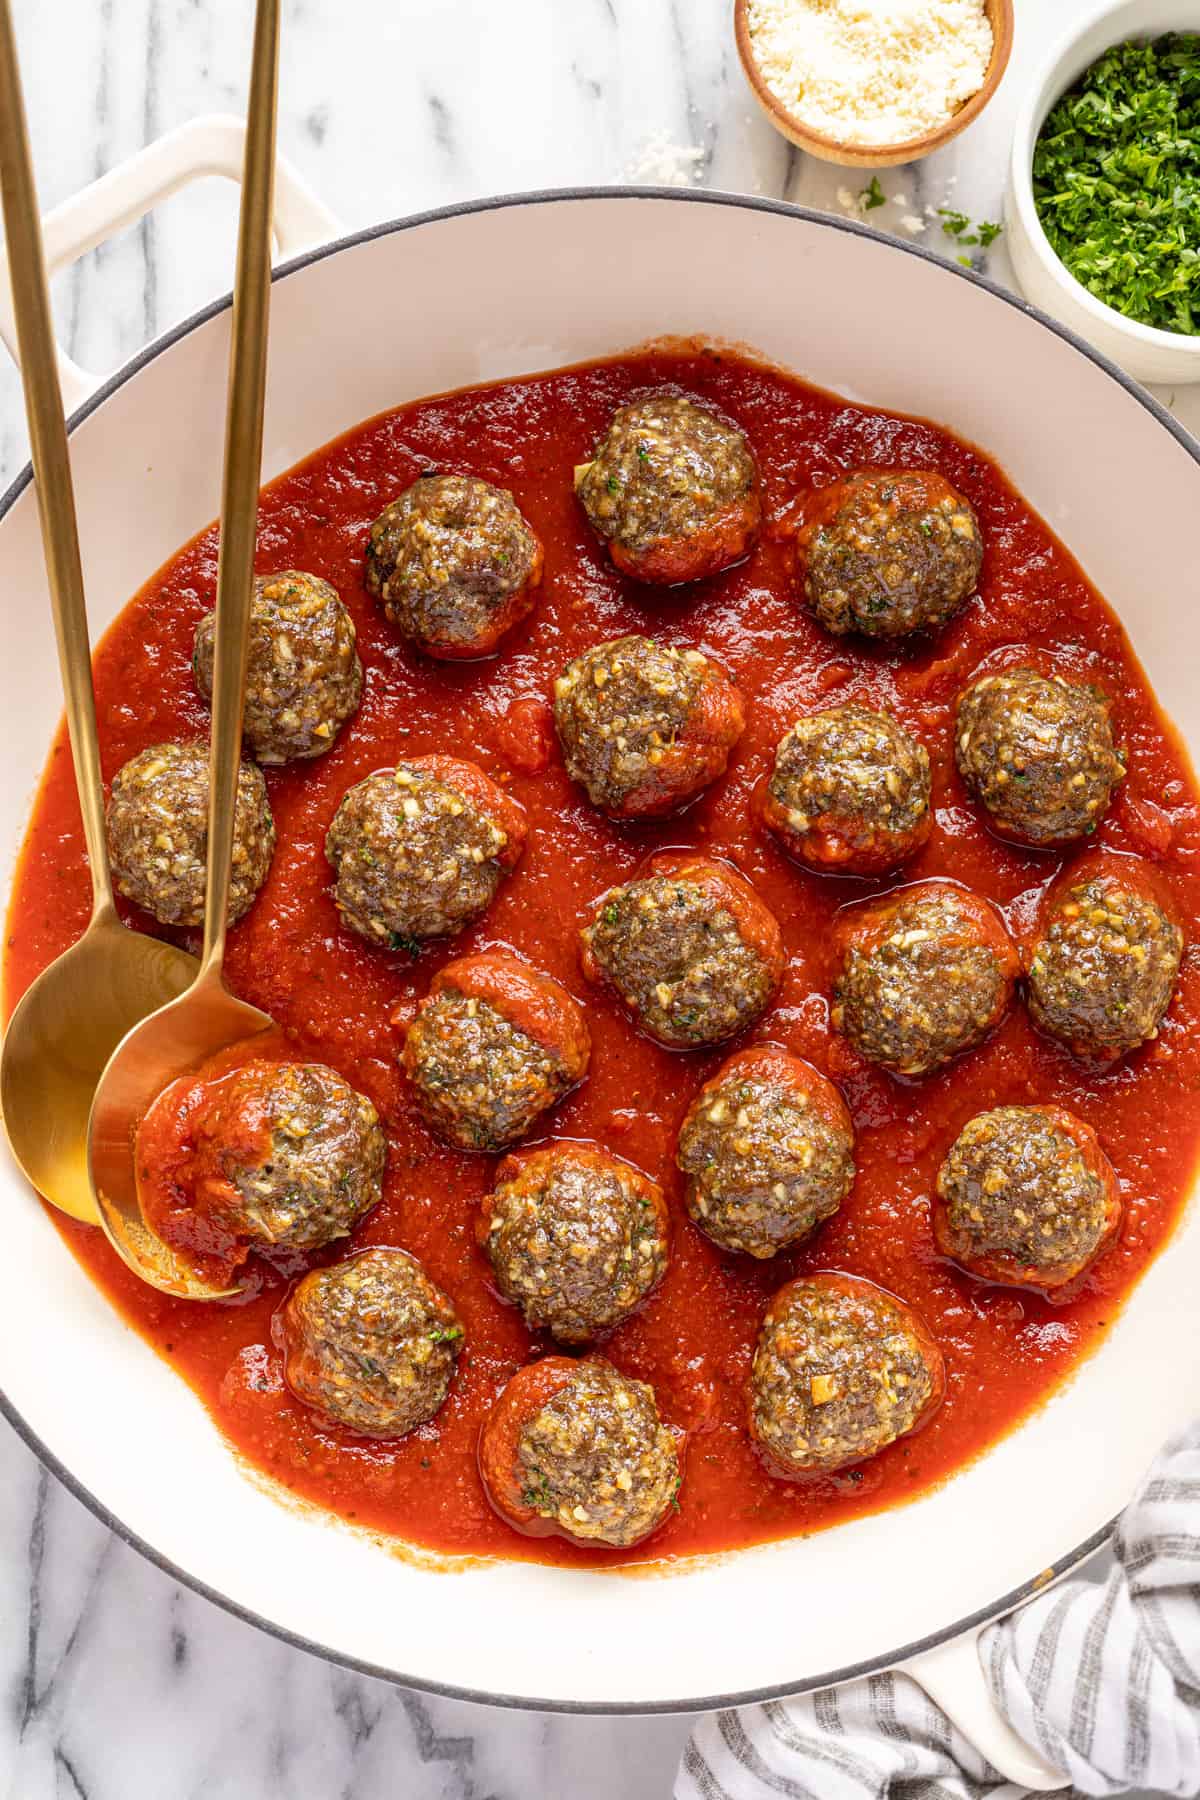 Large white pan filled with red sauce and homemade baked meatballs.